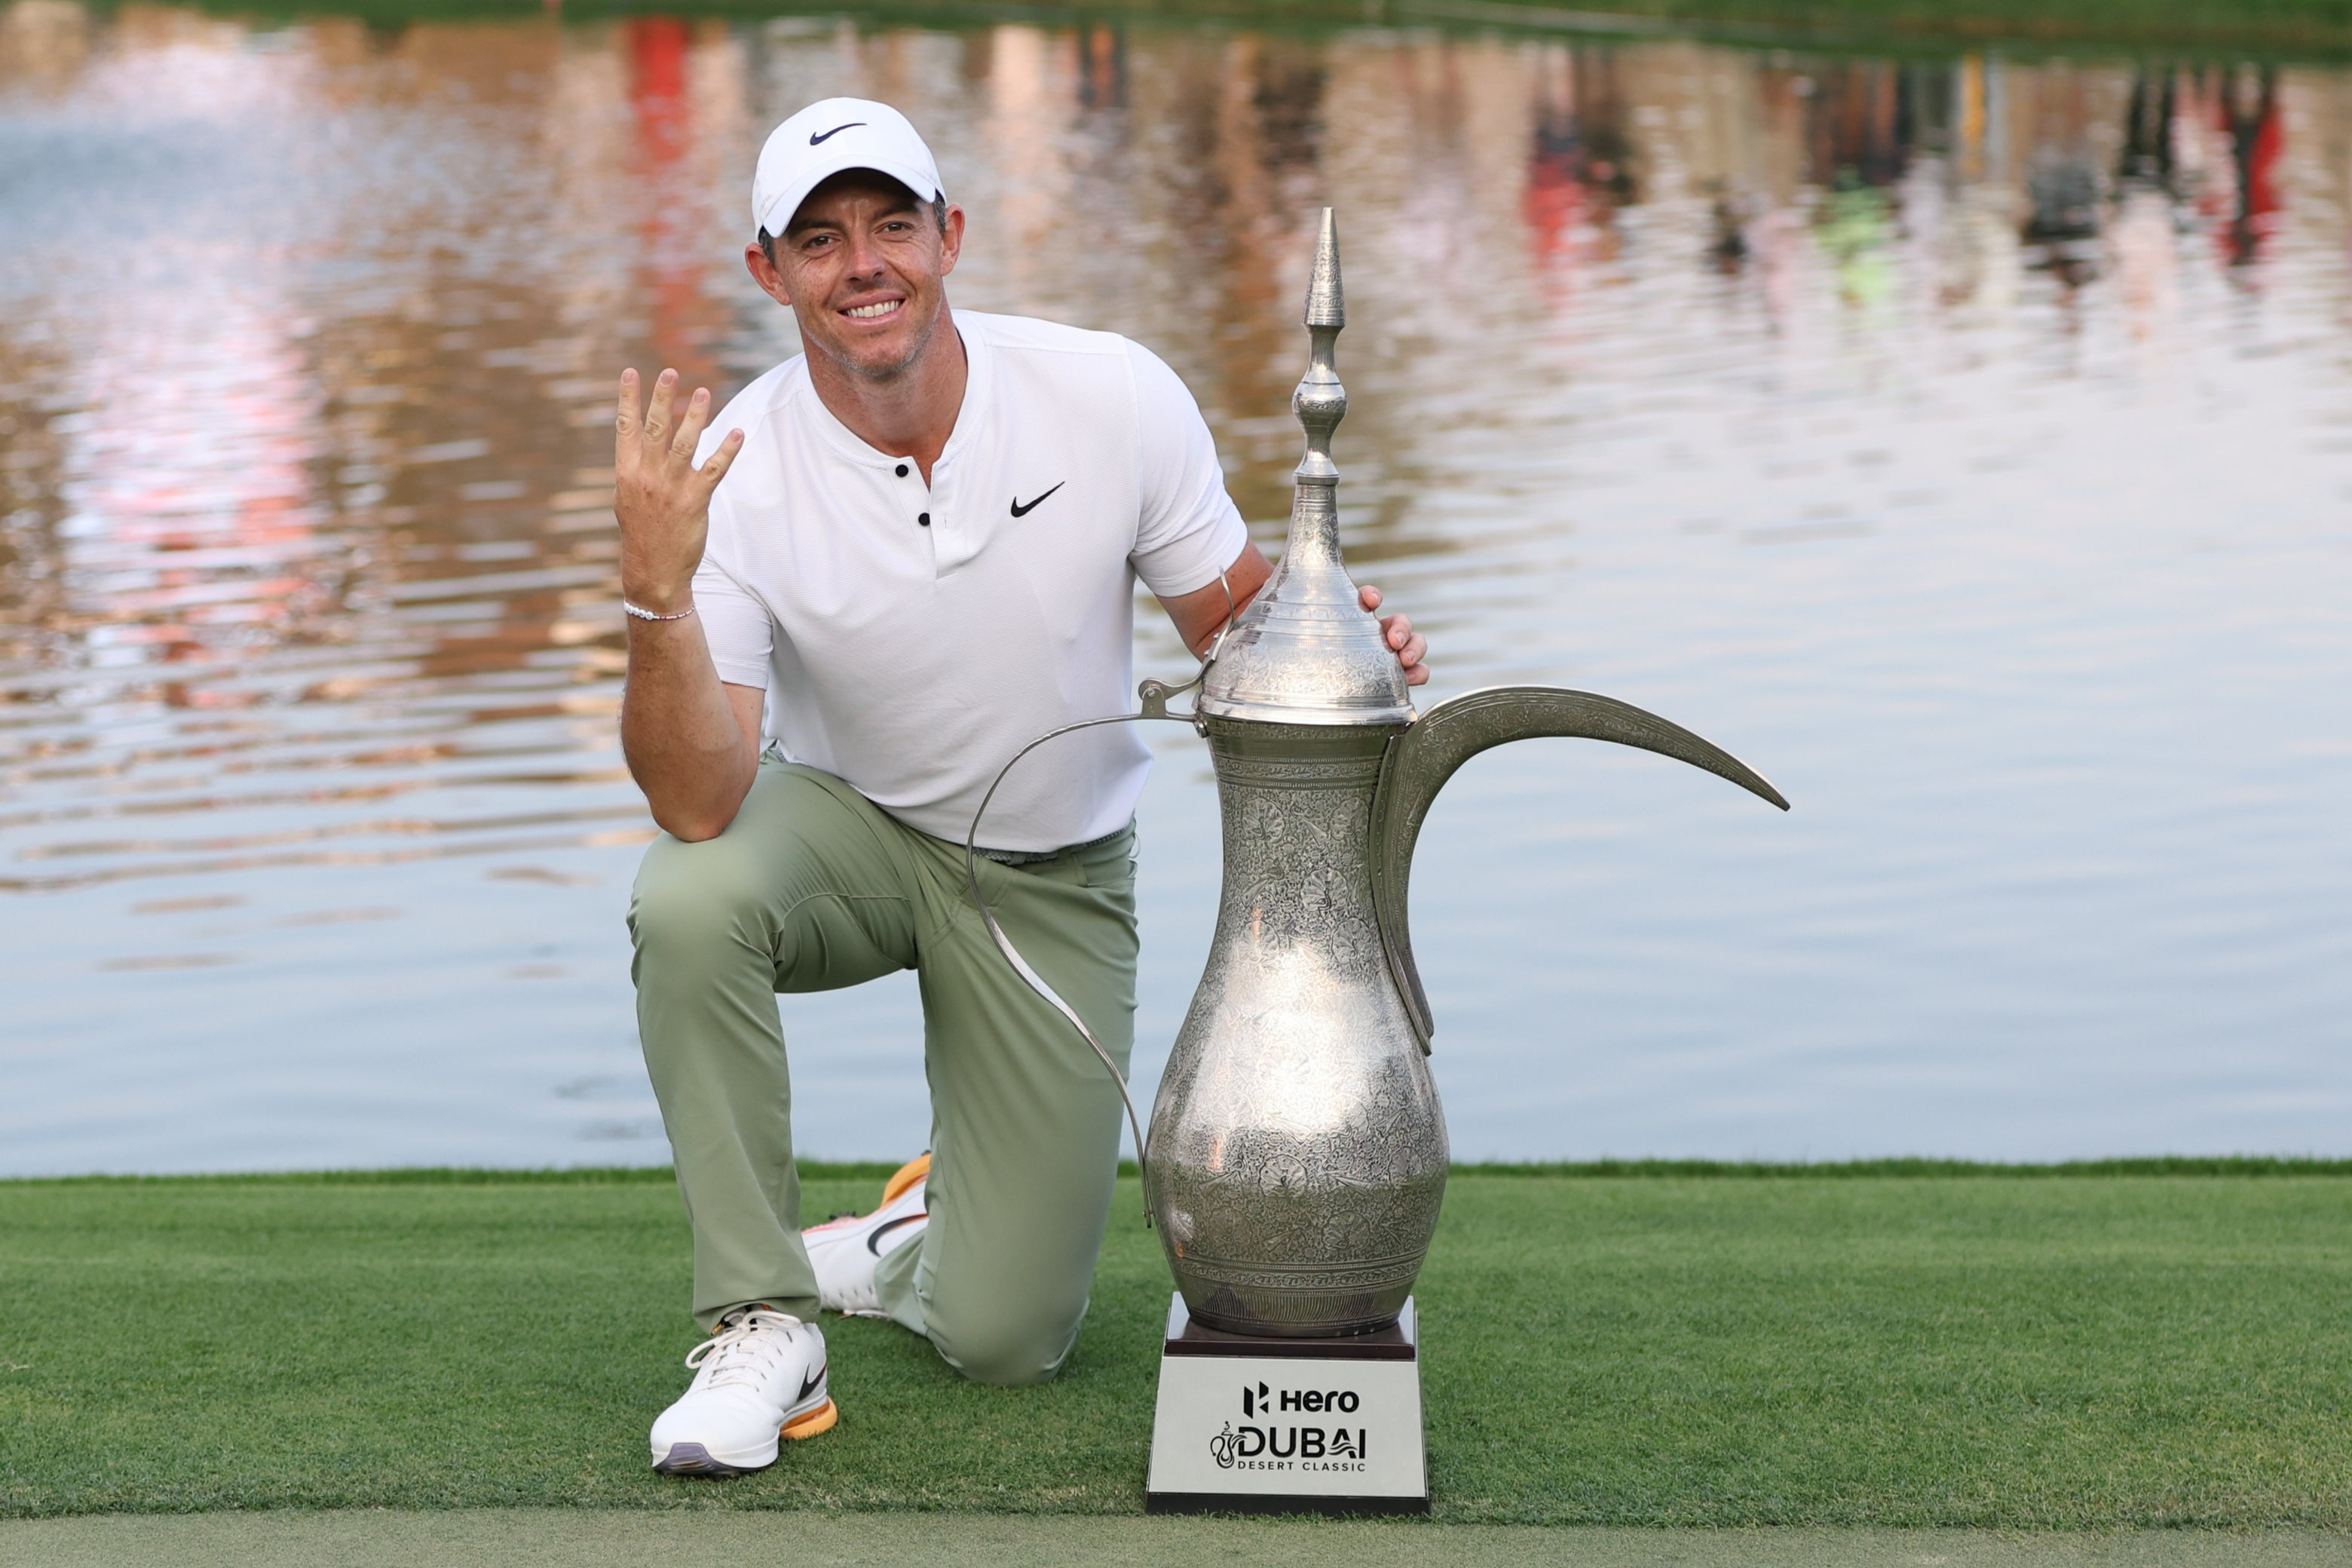 Rory McIlroy claimed the Dubai Desert Classic for a fourth time